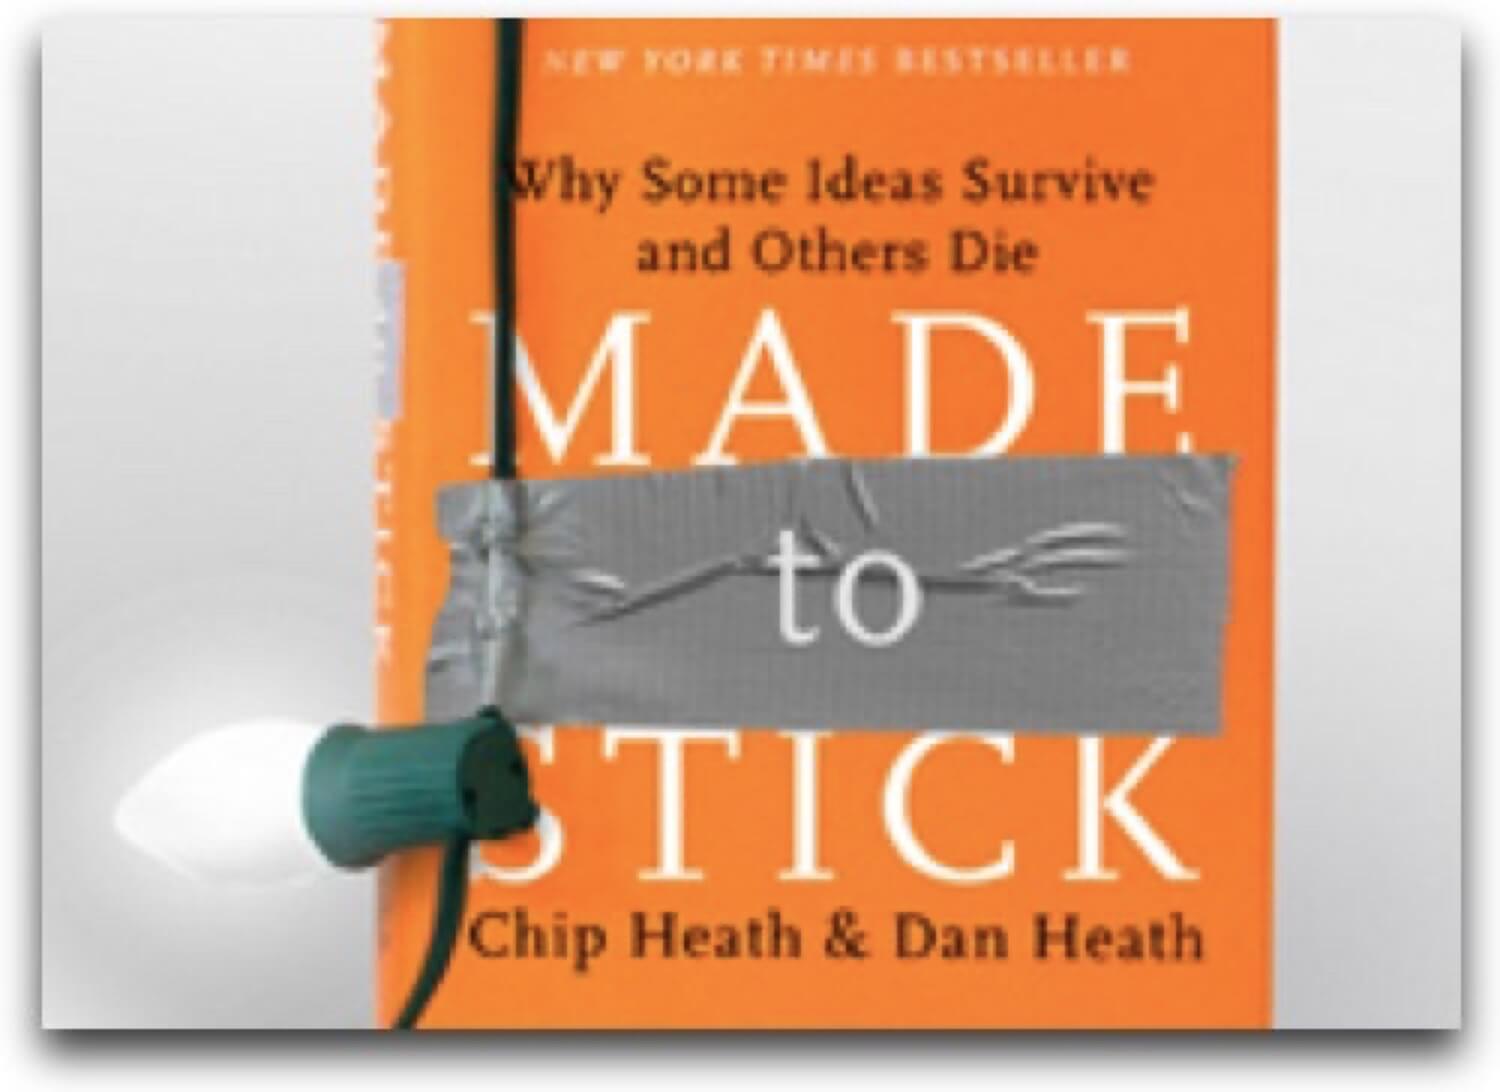 Audiobook of the week: Made to Stick by Chip and Dan Heath